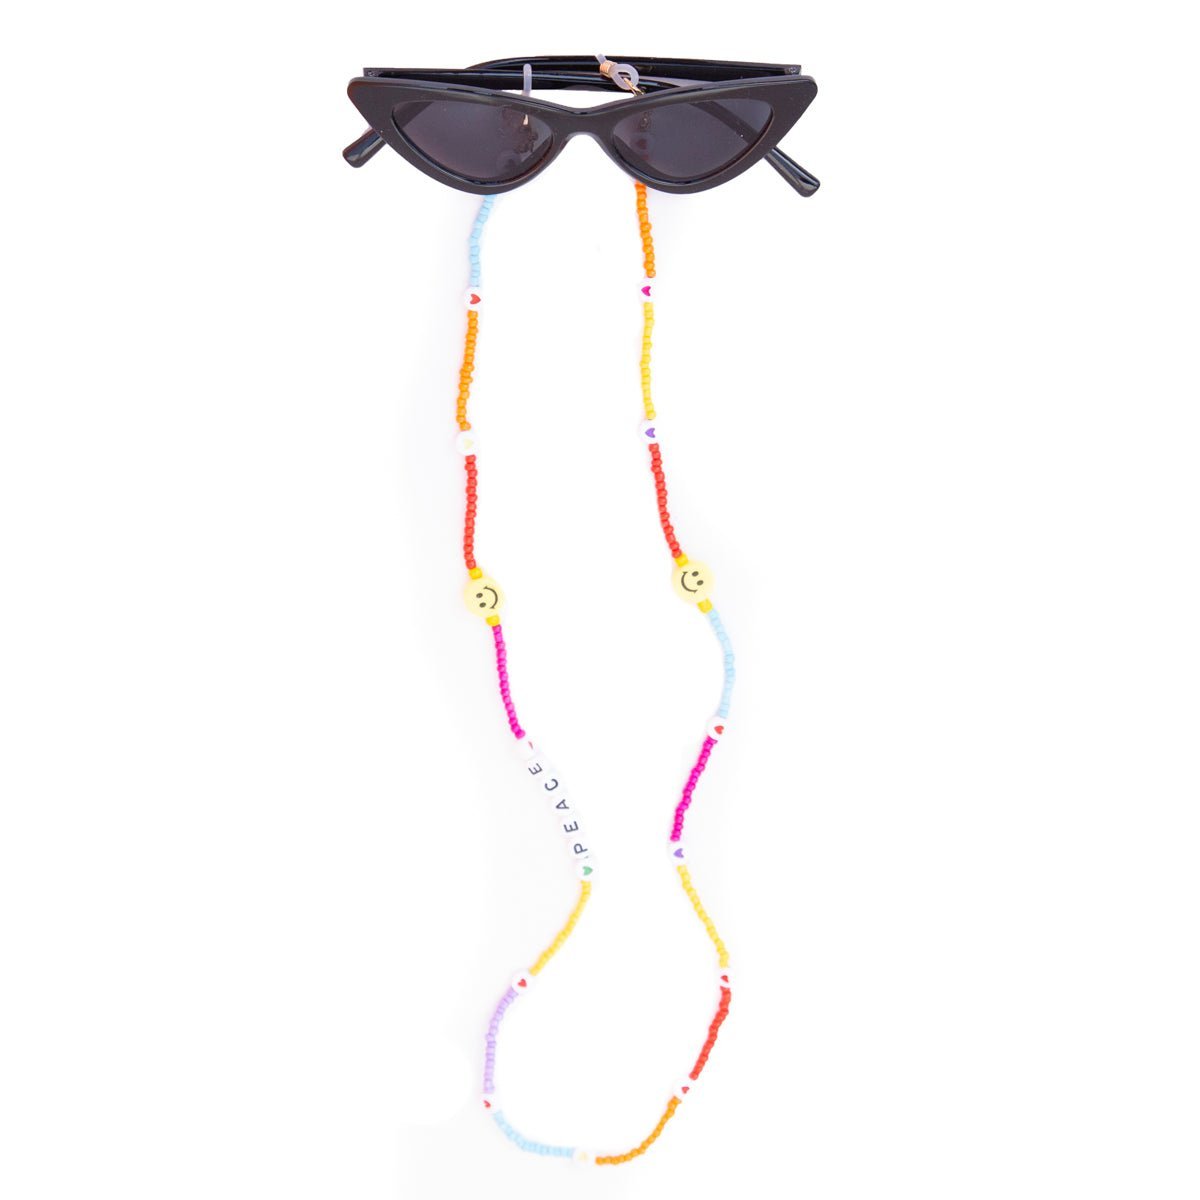 CAT EYE SUNGLASSES WITH HAPPY FACE PEACE BEADED CHAIN - SUNGLASSES